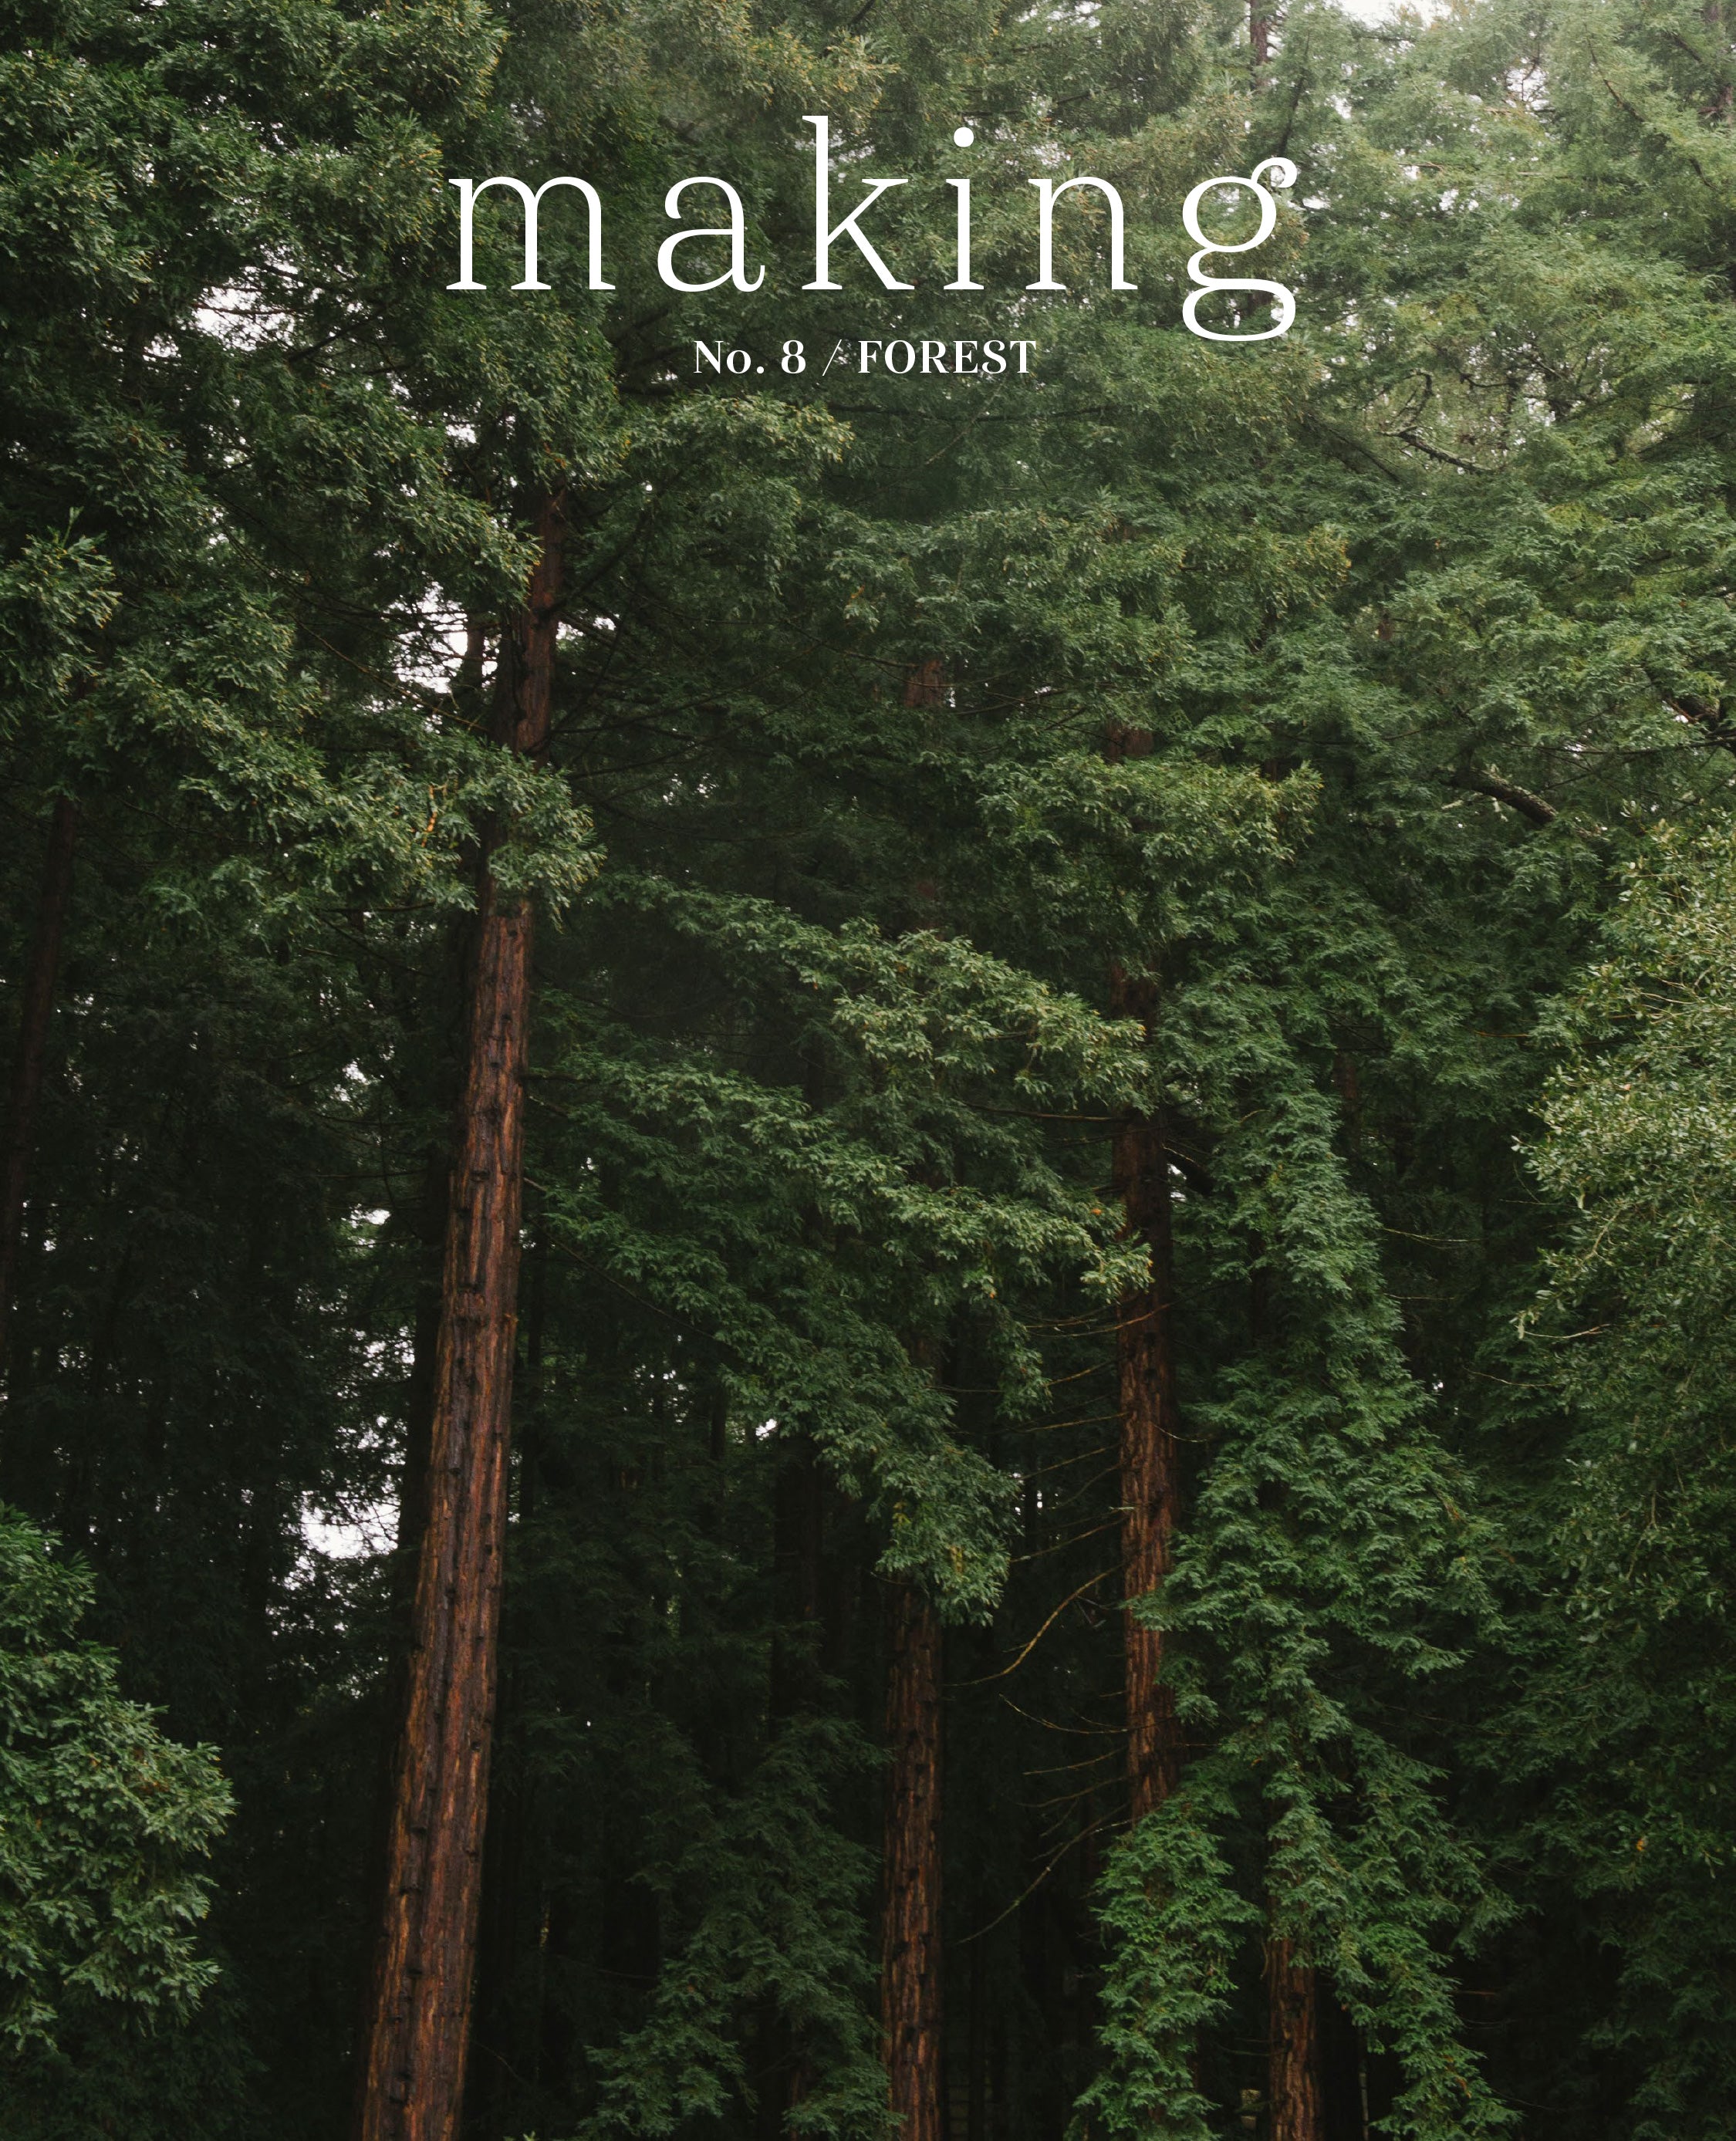 Making No. 8 /Forest